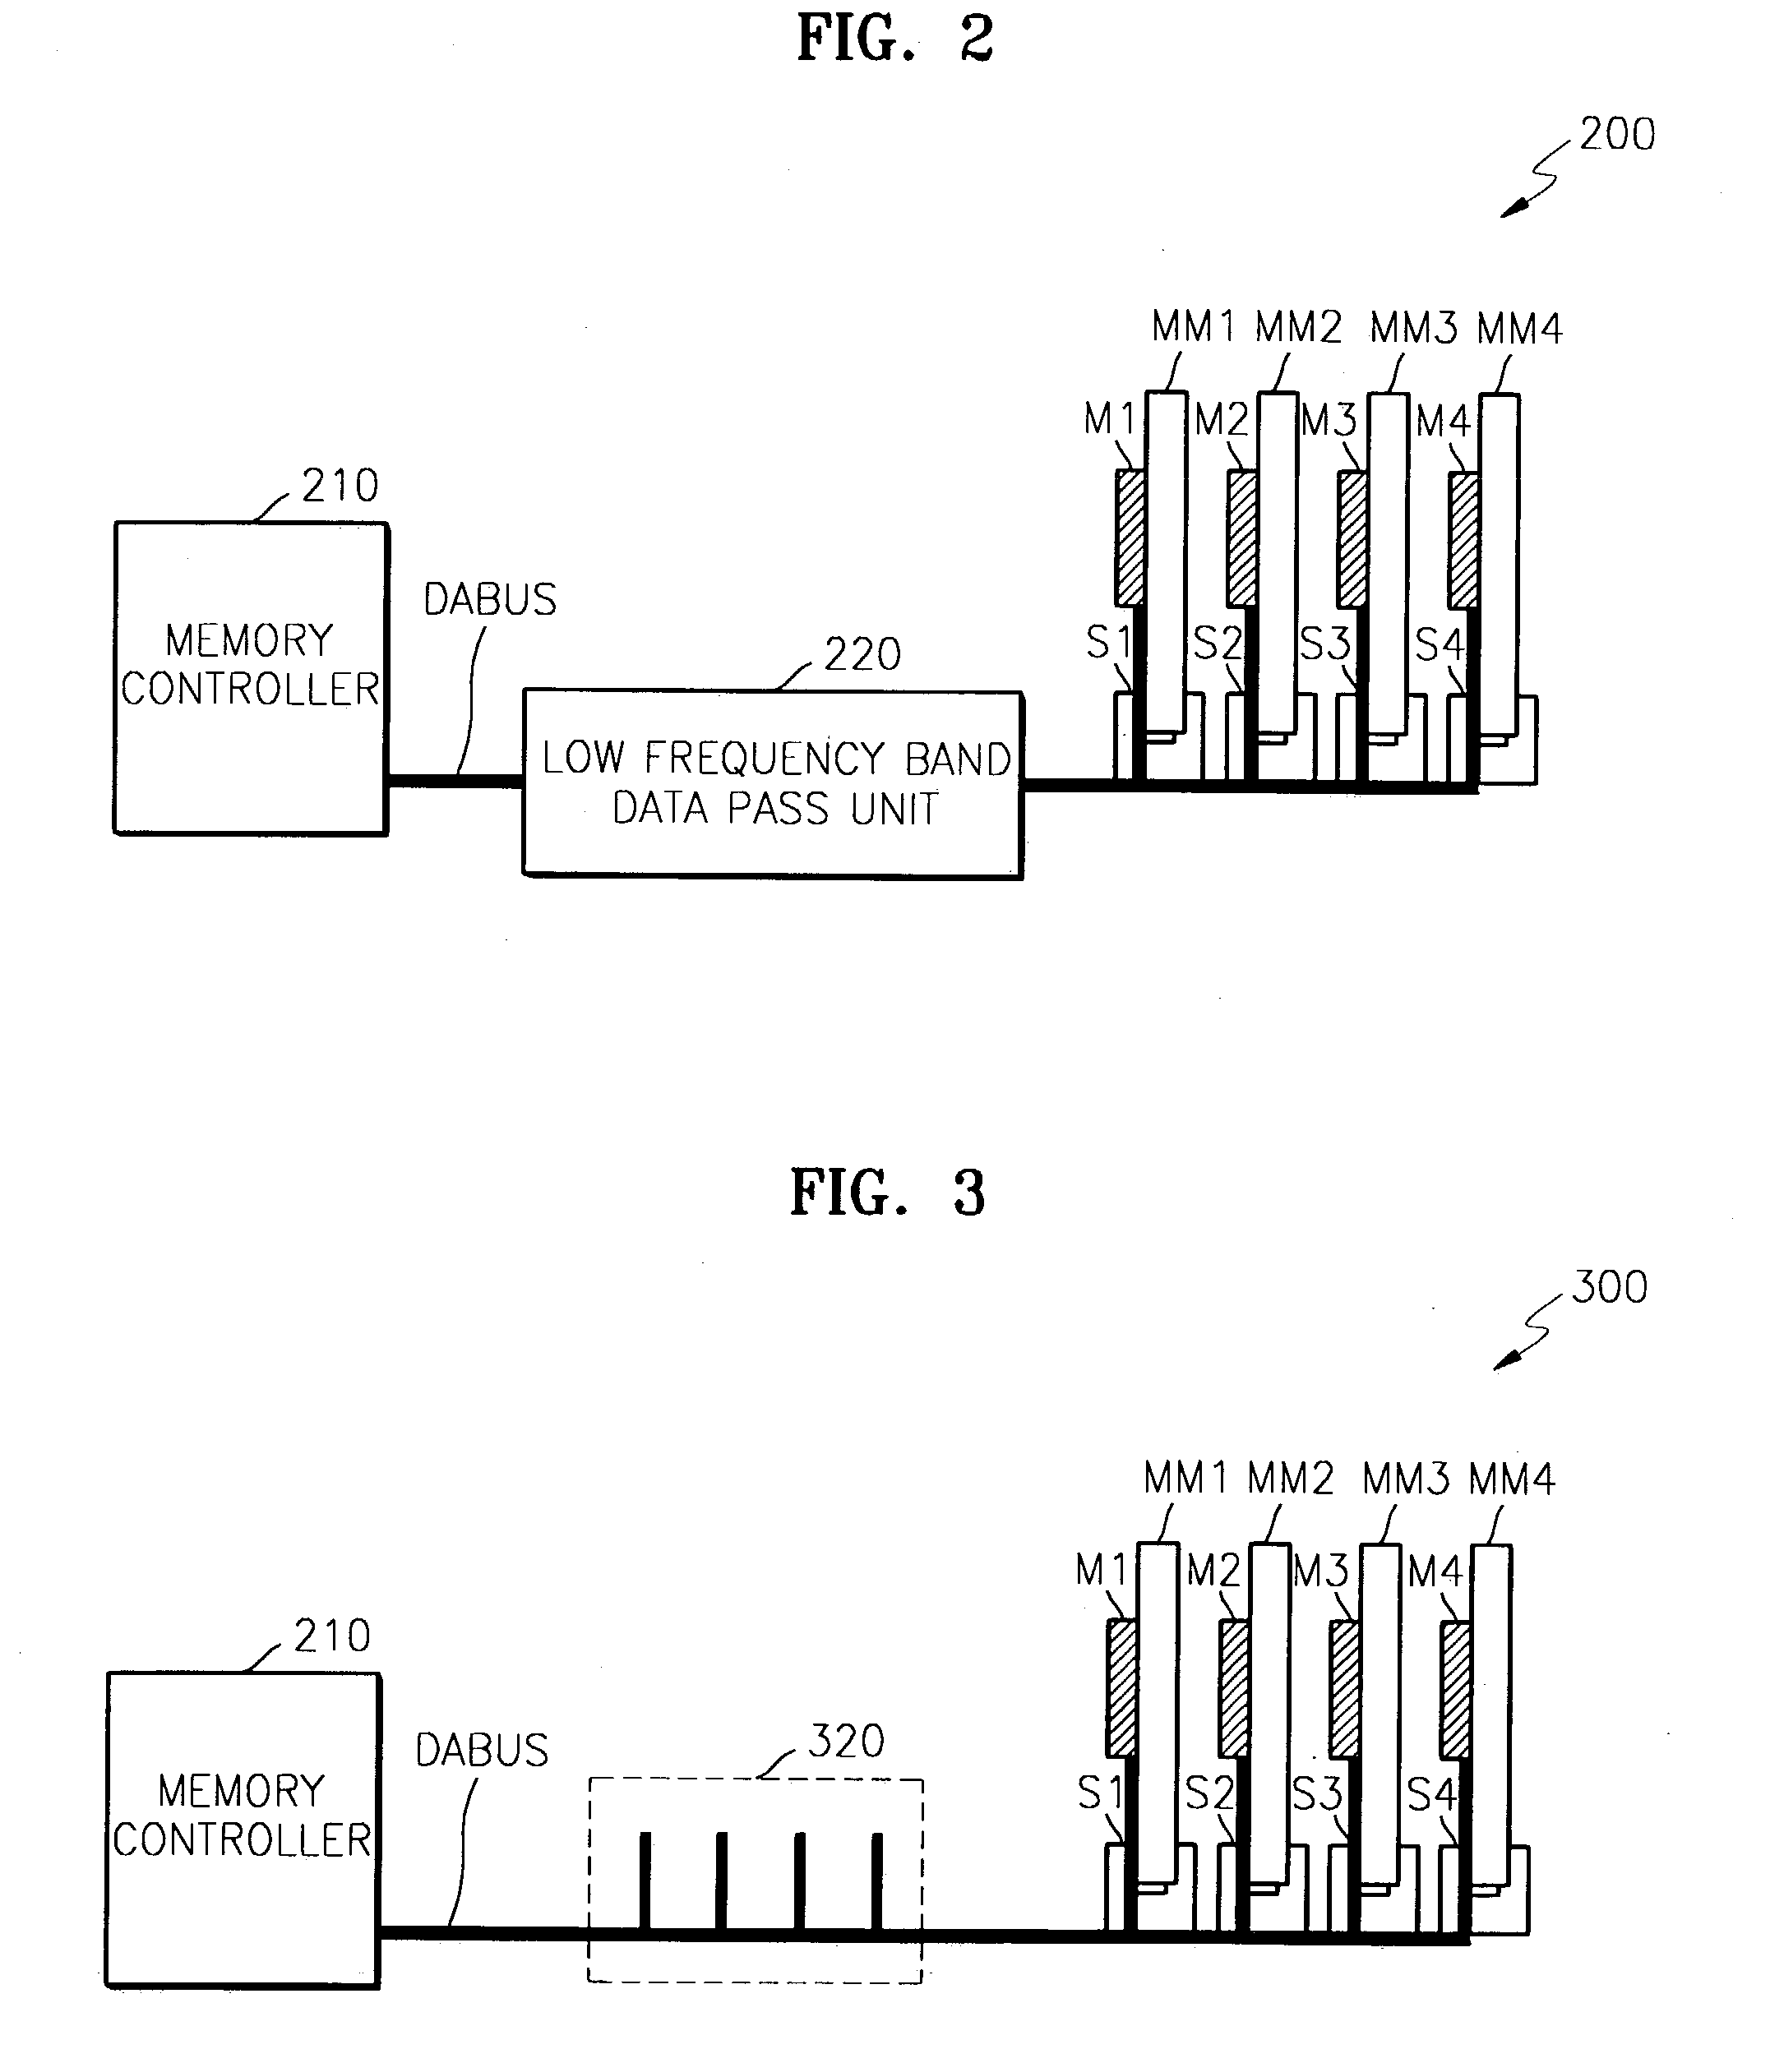 Semiconductor memory device with data bus scheme for reducing high frequency noise